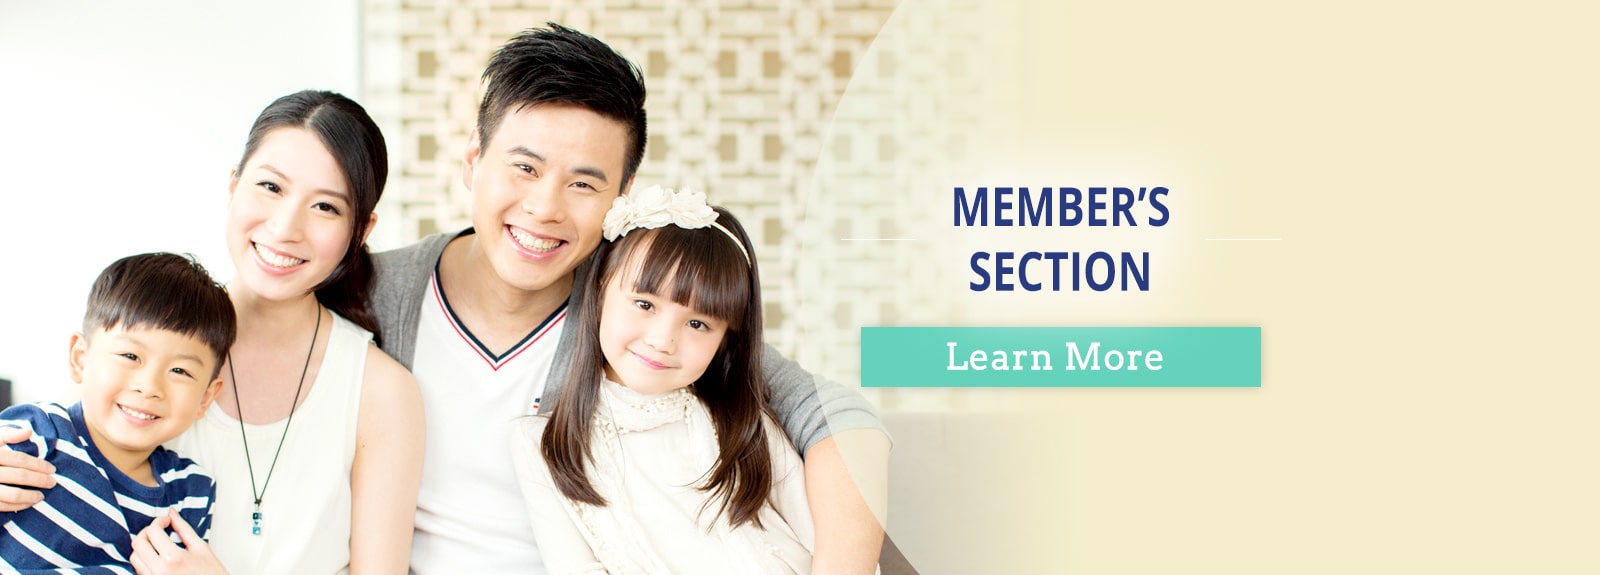 Member's Section. Learn More.